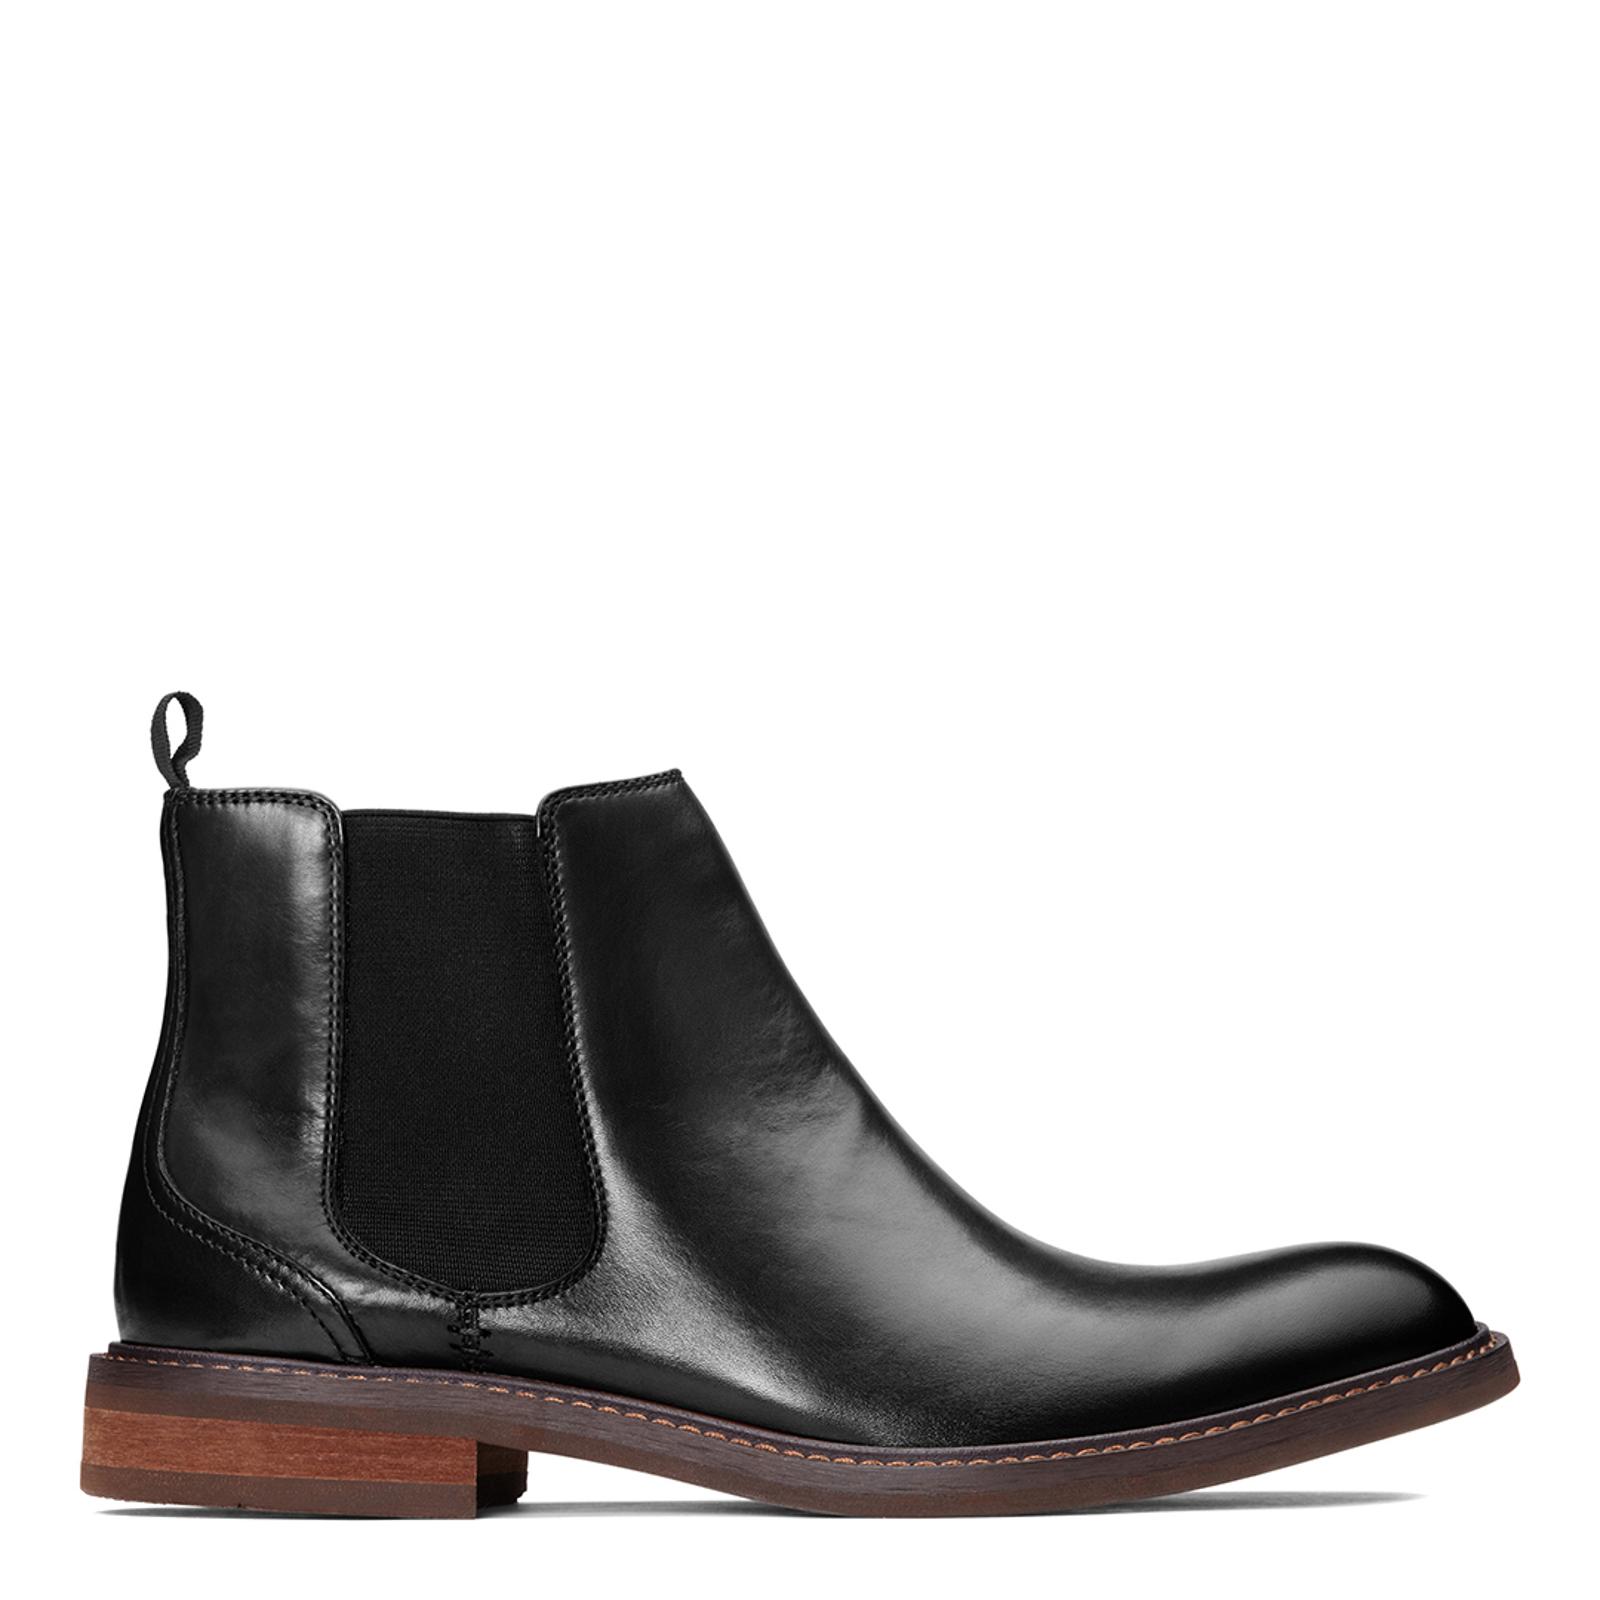 Black Kingsley Leather Boots - BrandAlley